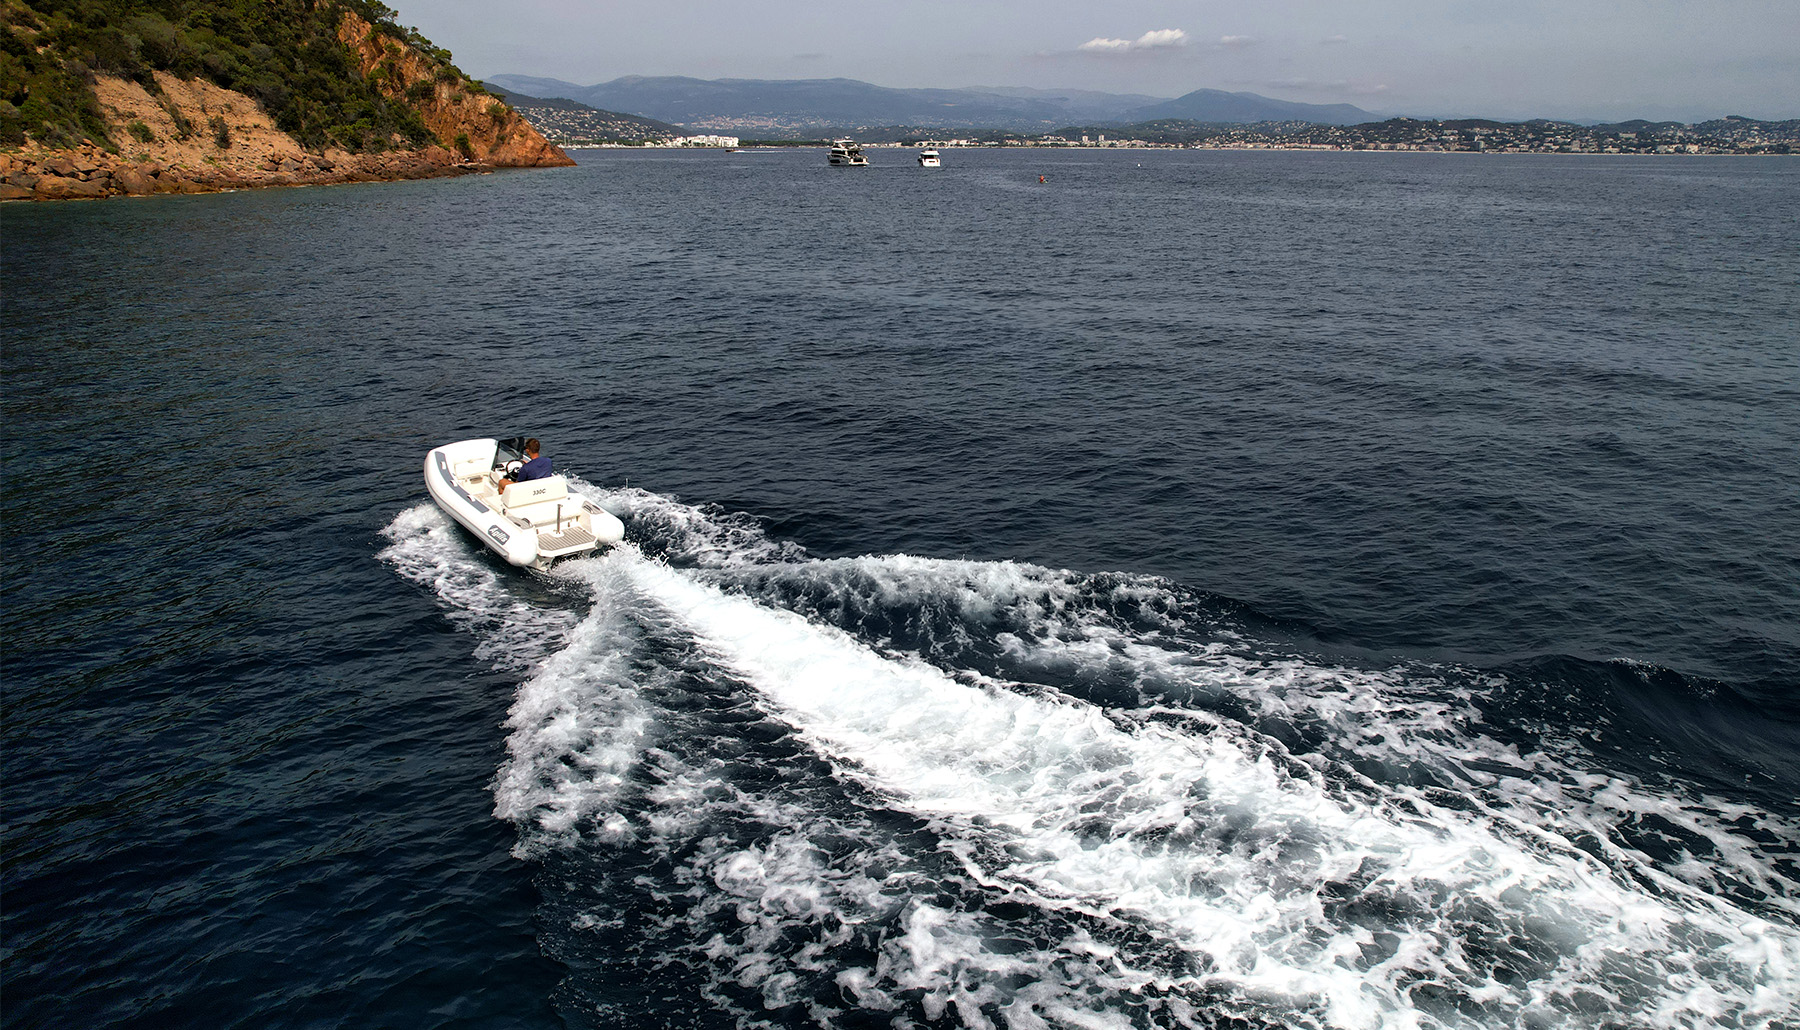 Agilis 330 - rib with water propulsion system